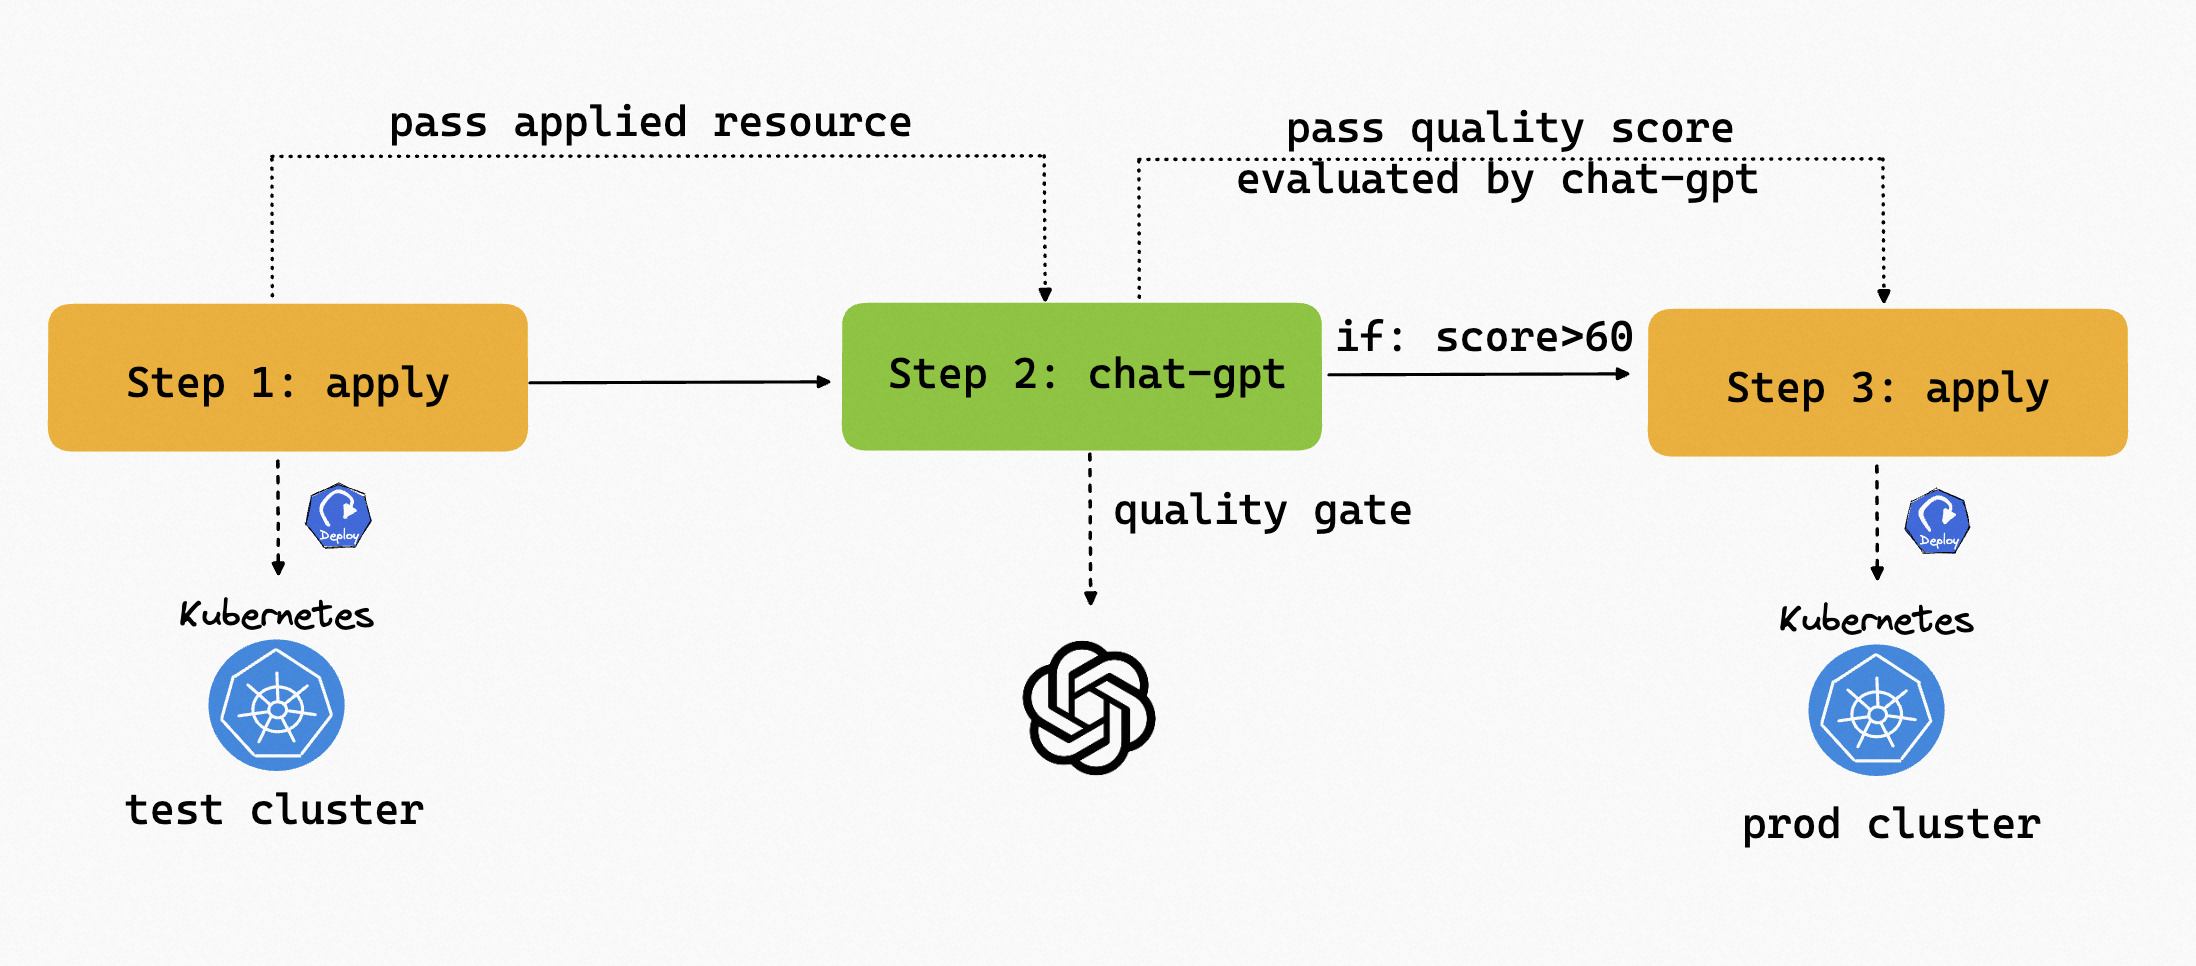 The process of using quality gate in workflow